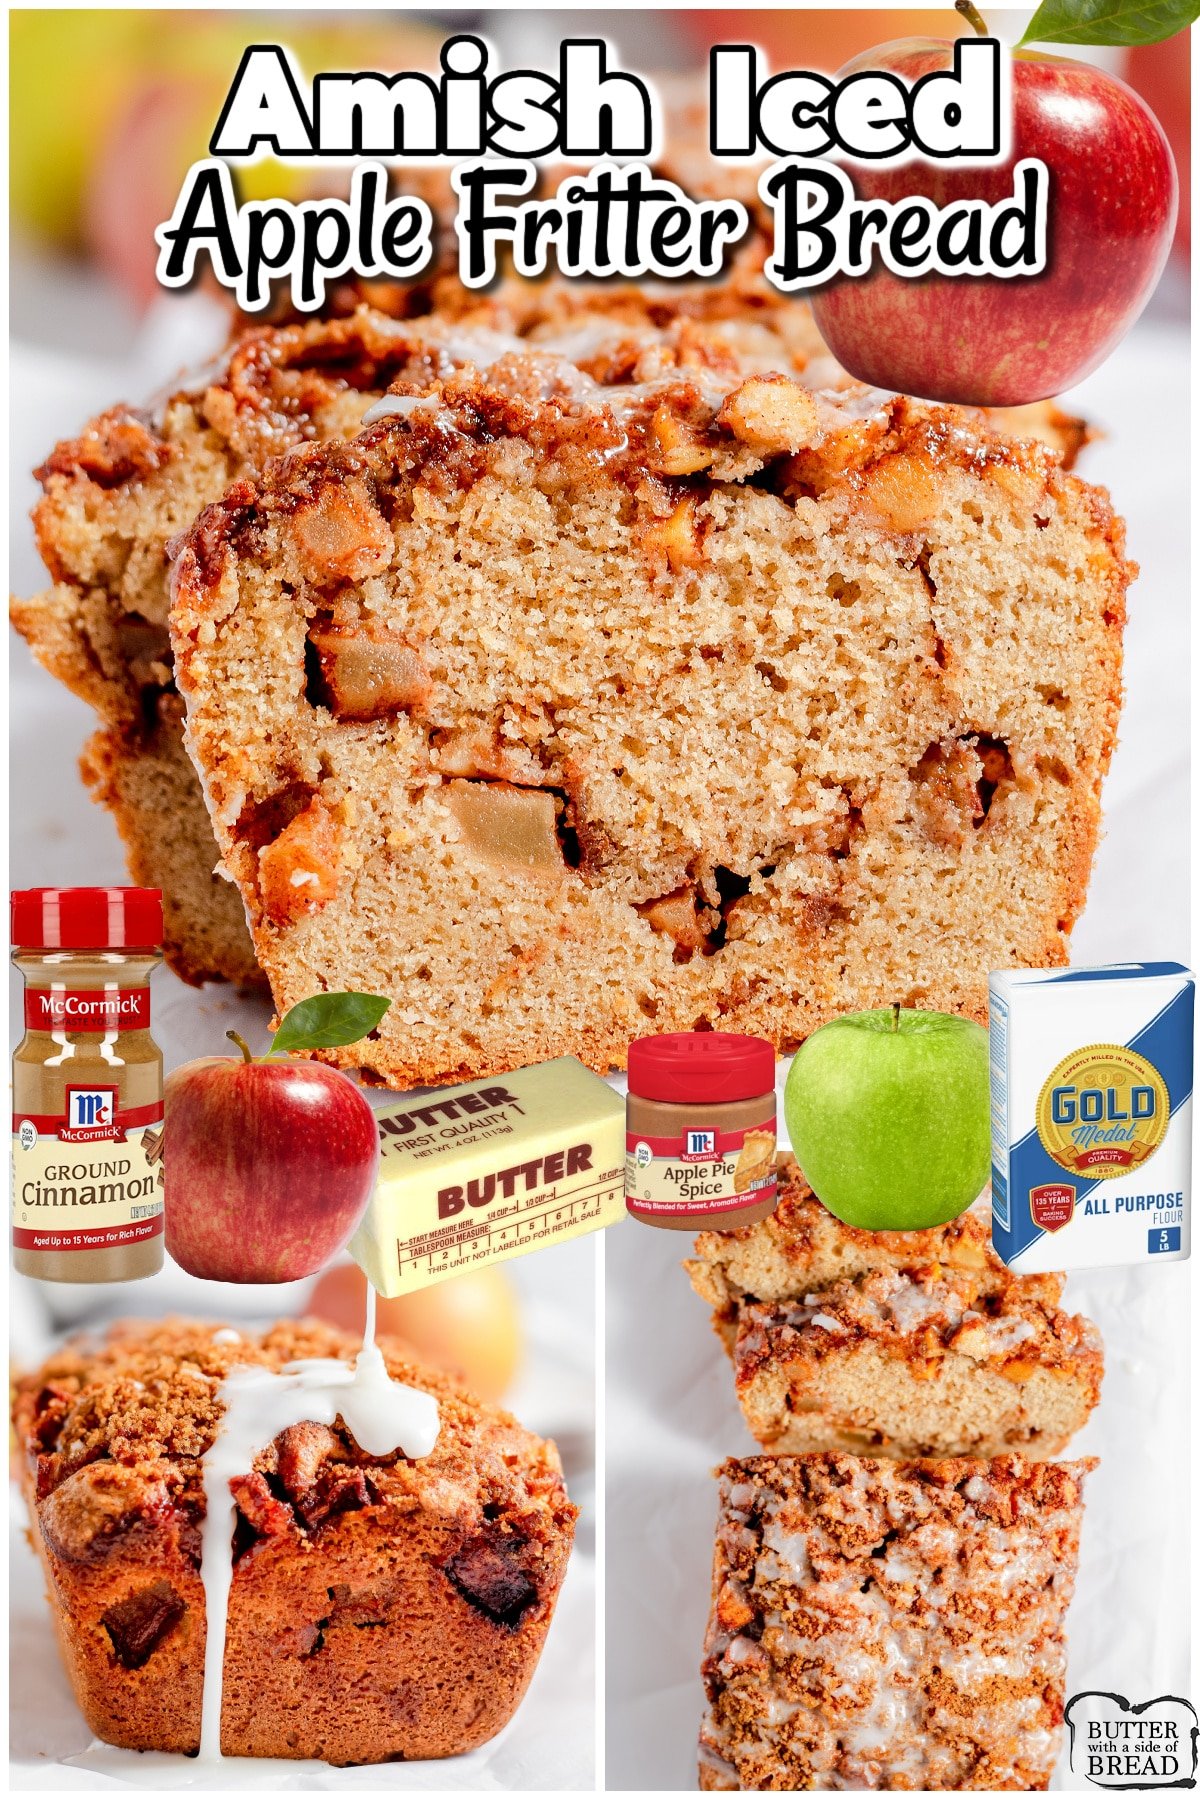 Amish Apple Fritter Bread uses classic ingredients like fresh apples, brown sugar, & butter that are baked into a spiced loaf & topped with sweet glaze! This apple cinnamon bread is a twist on the classic apple fritter donut, but in a soft bread form!